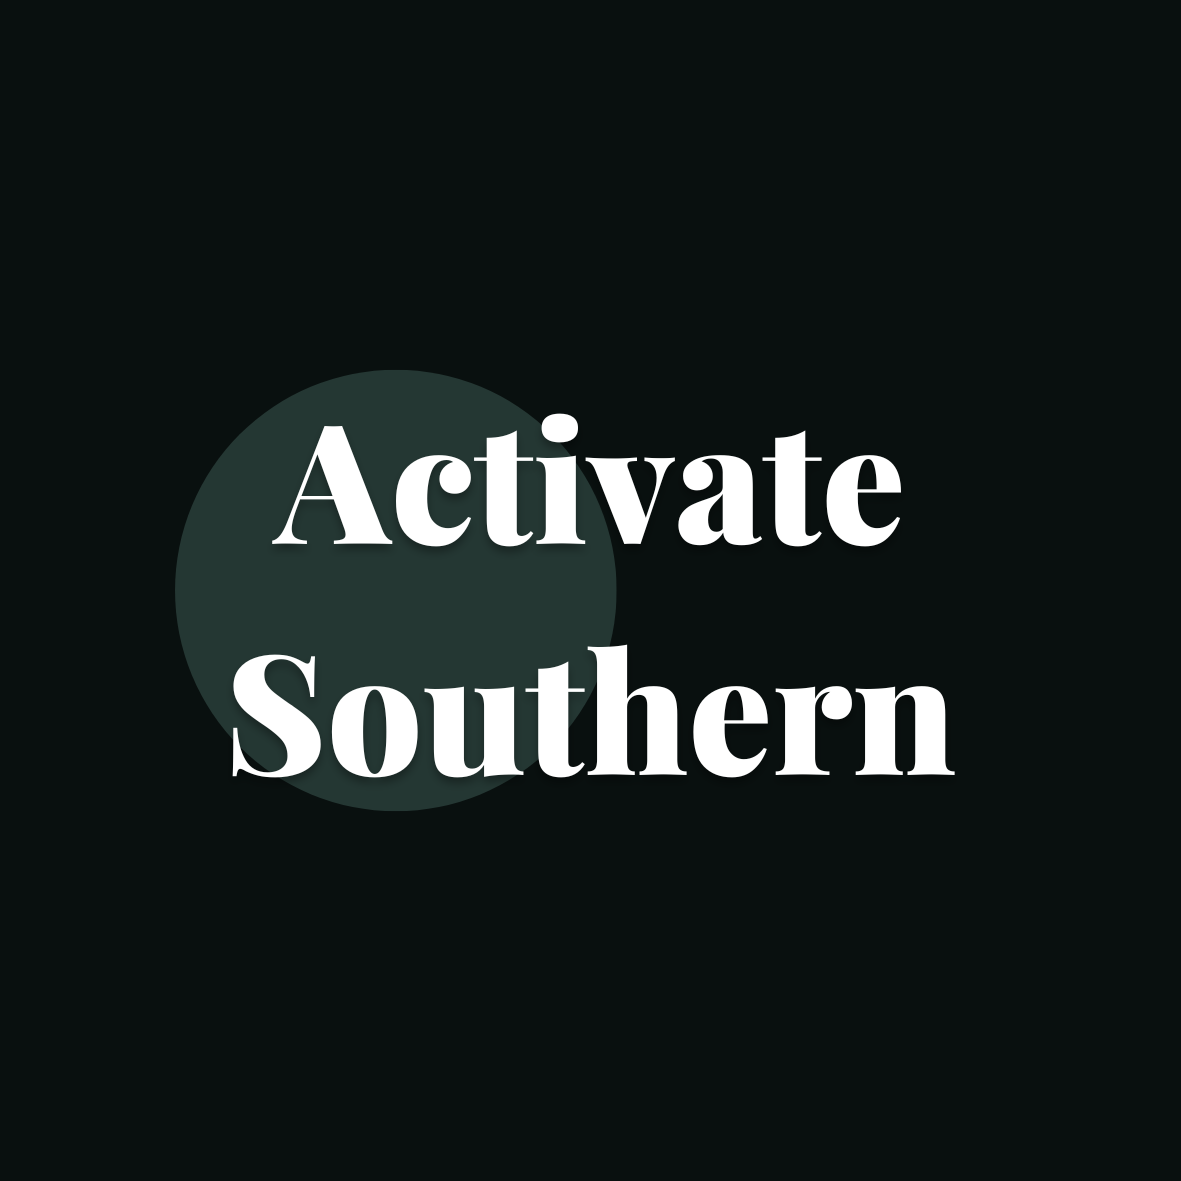 Activate Southern